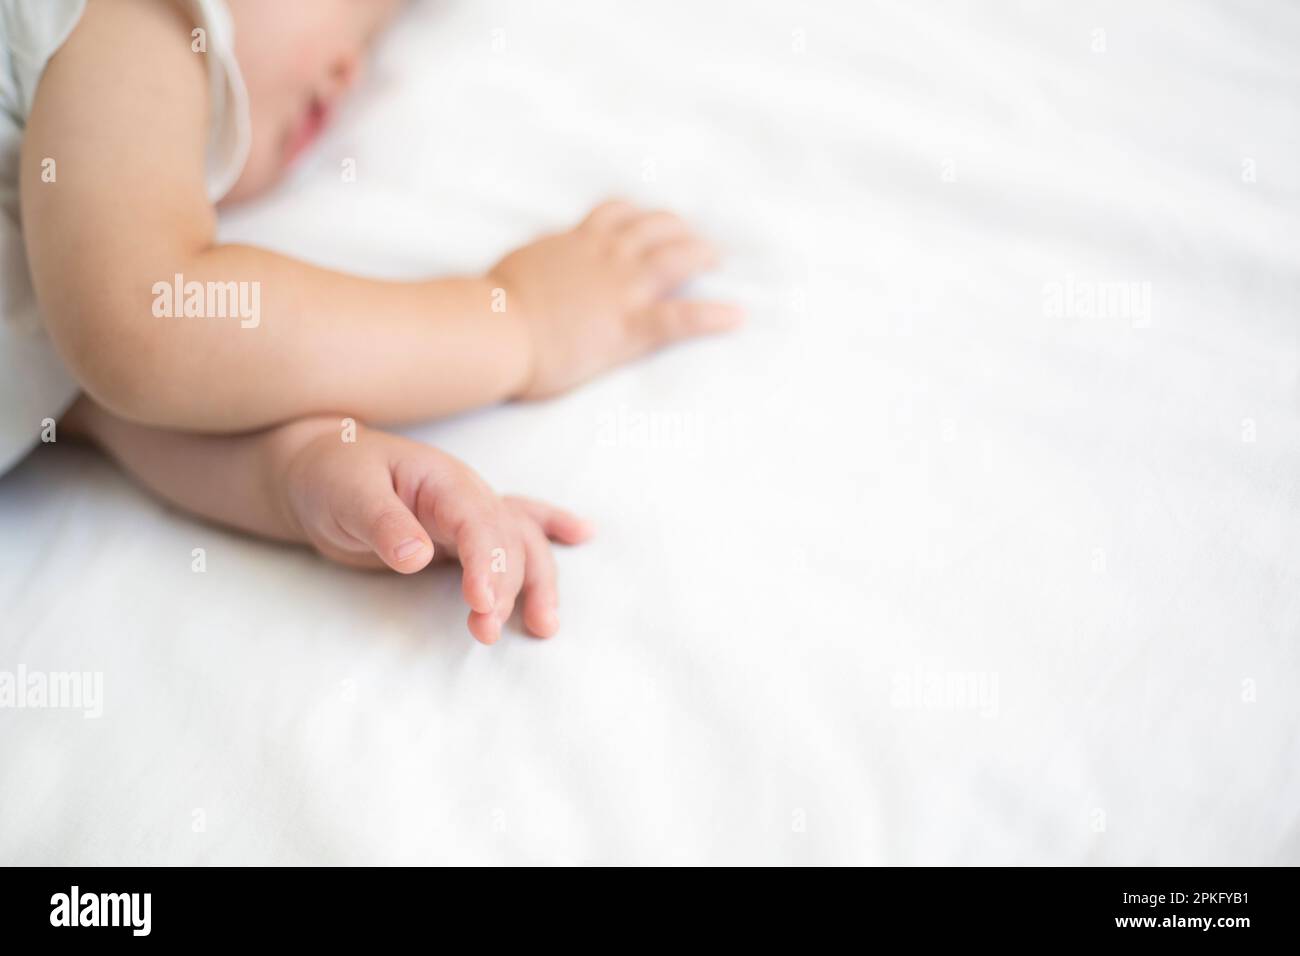 Napping baby's hands Stock Photo